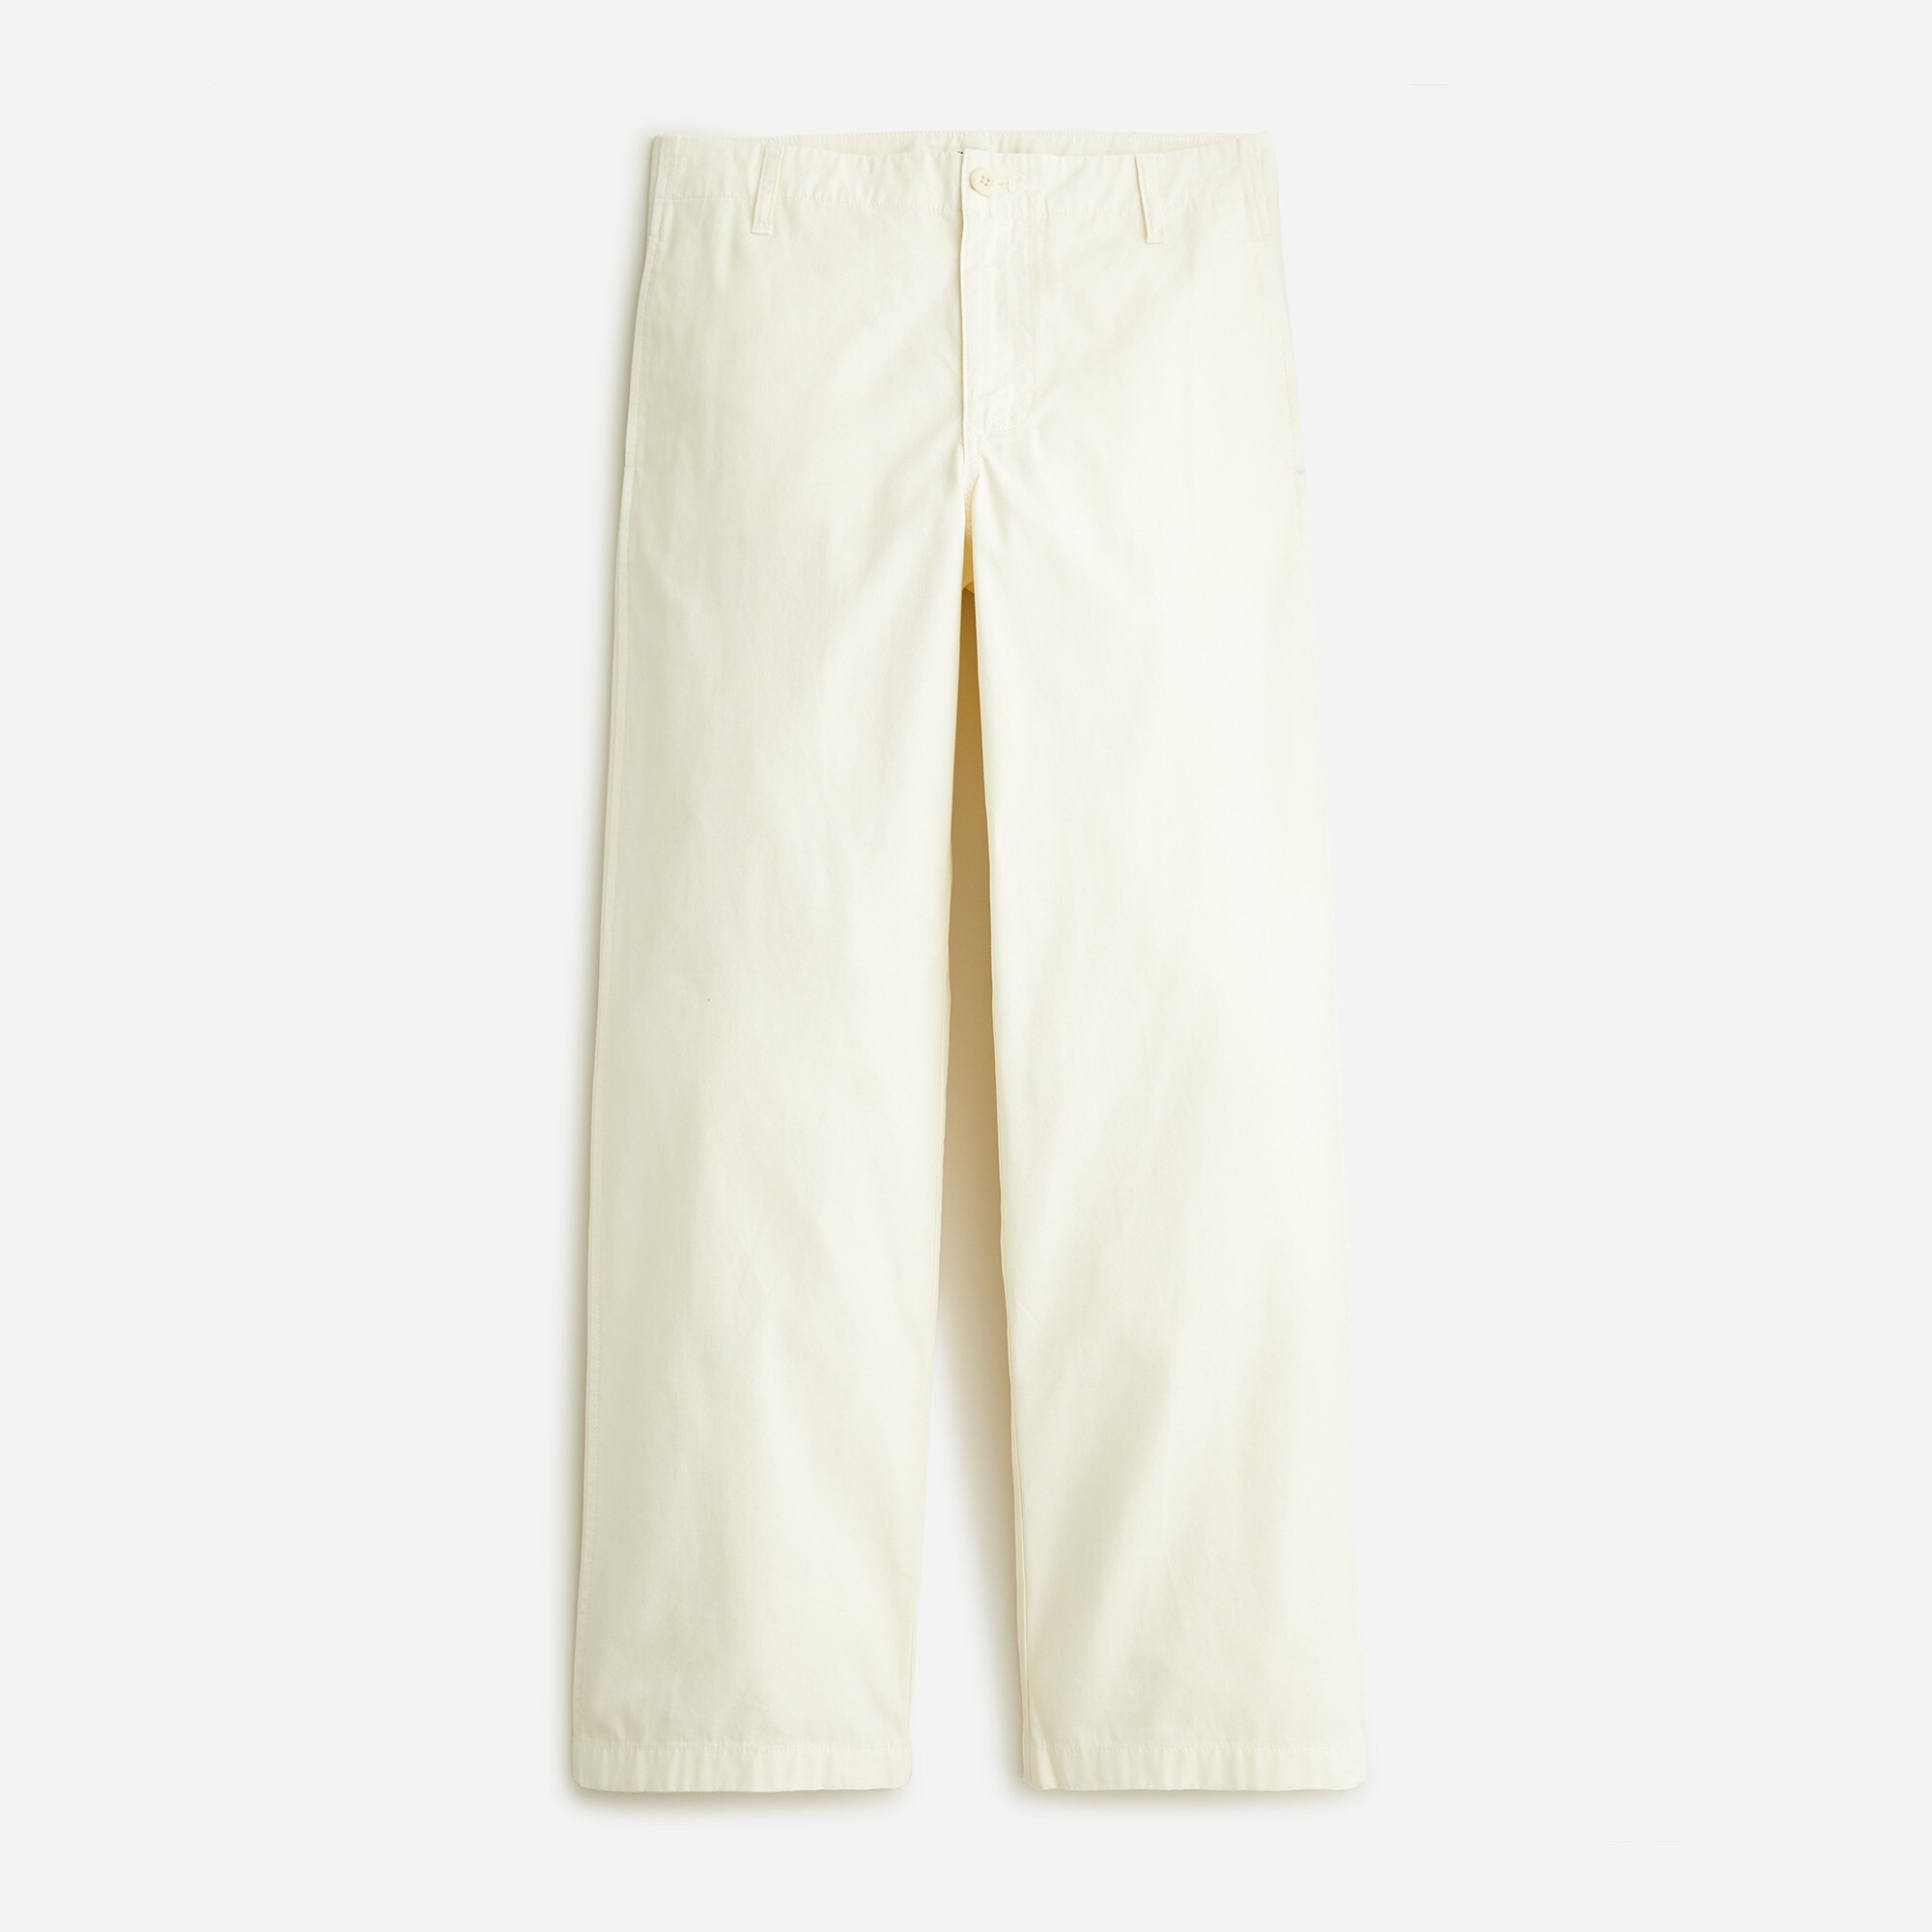 The Petite Wide Leg Sailor Pant in Chino